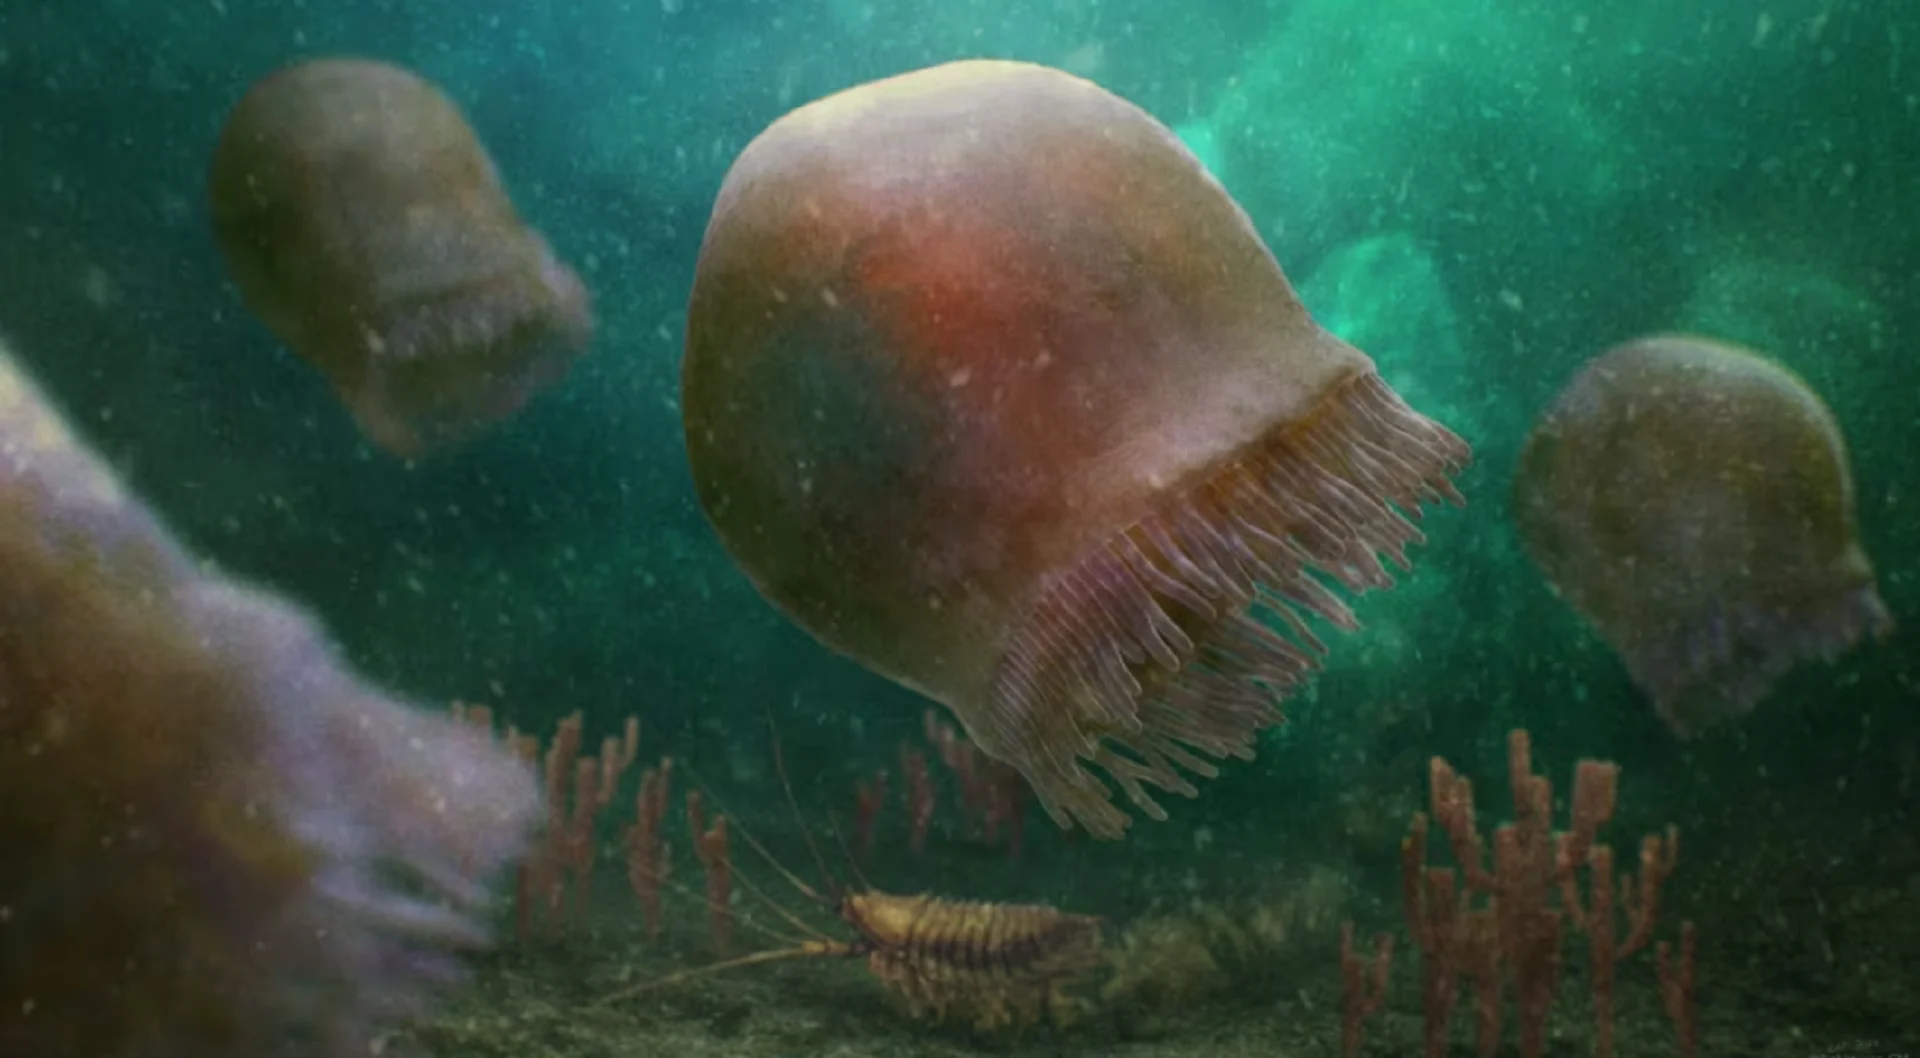 This jellyfish was the terror of the sea 500 million years ago